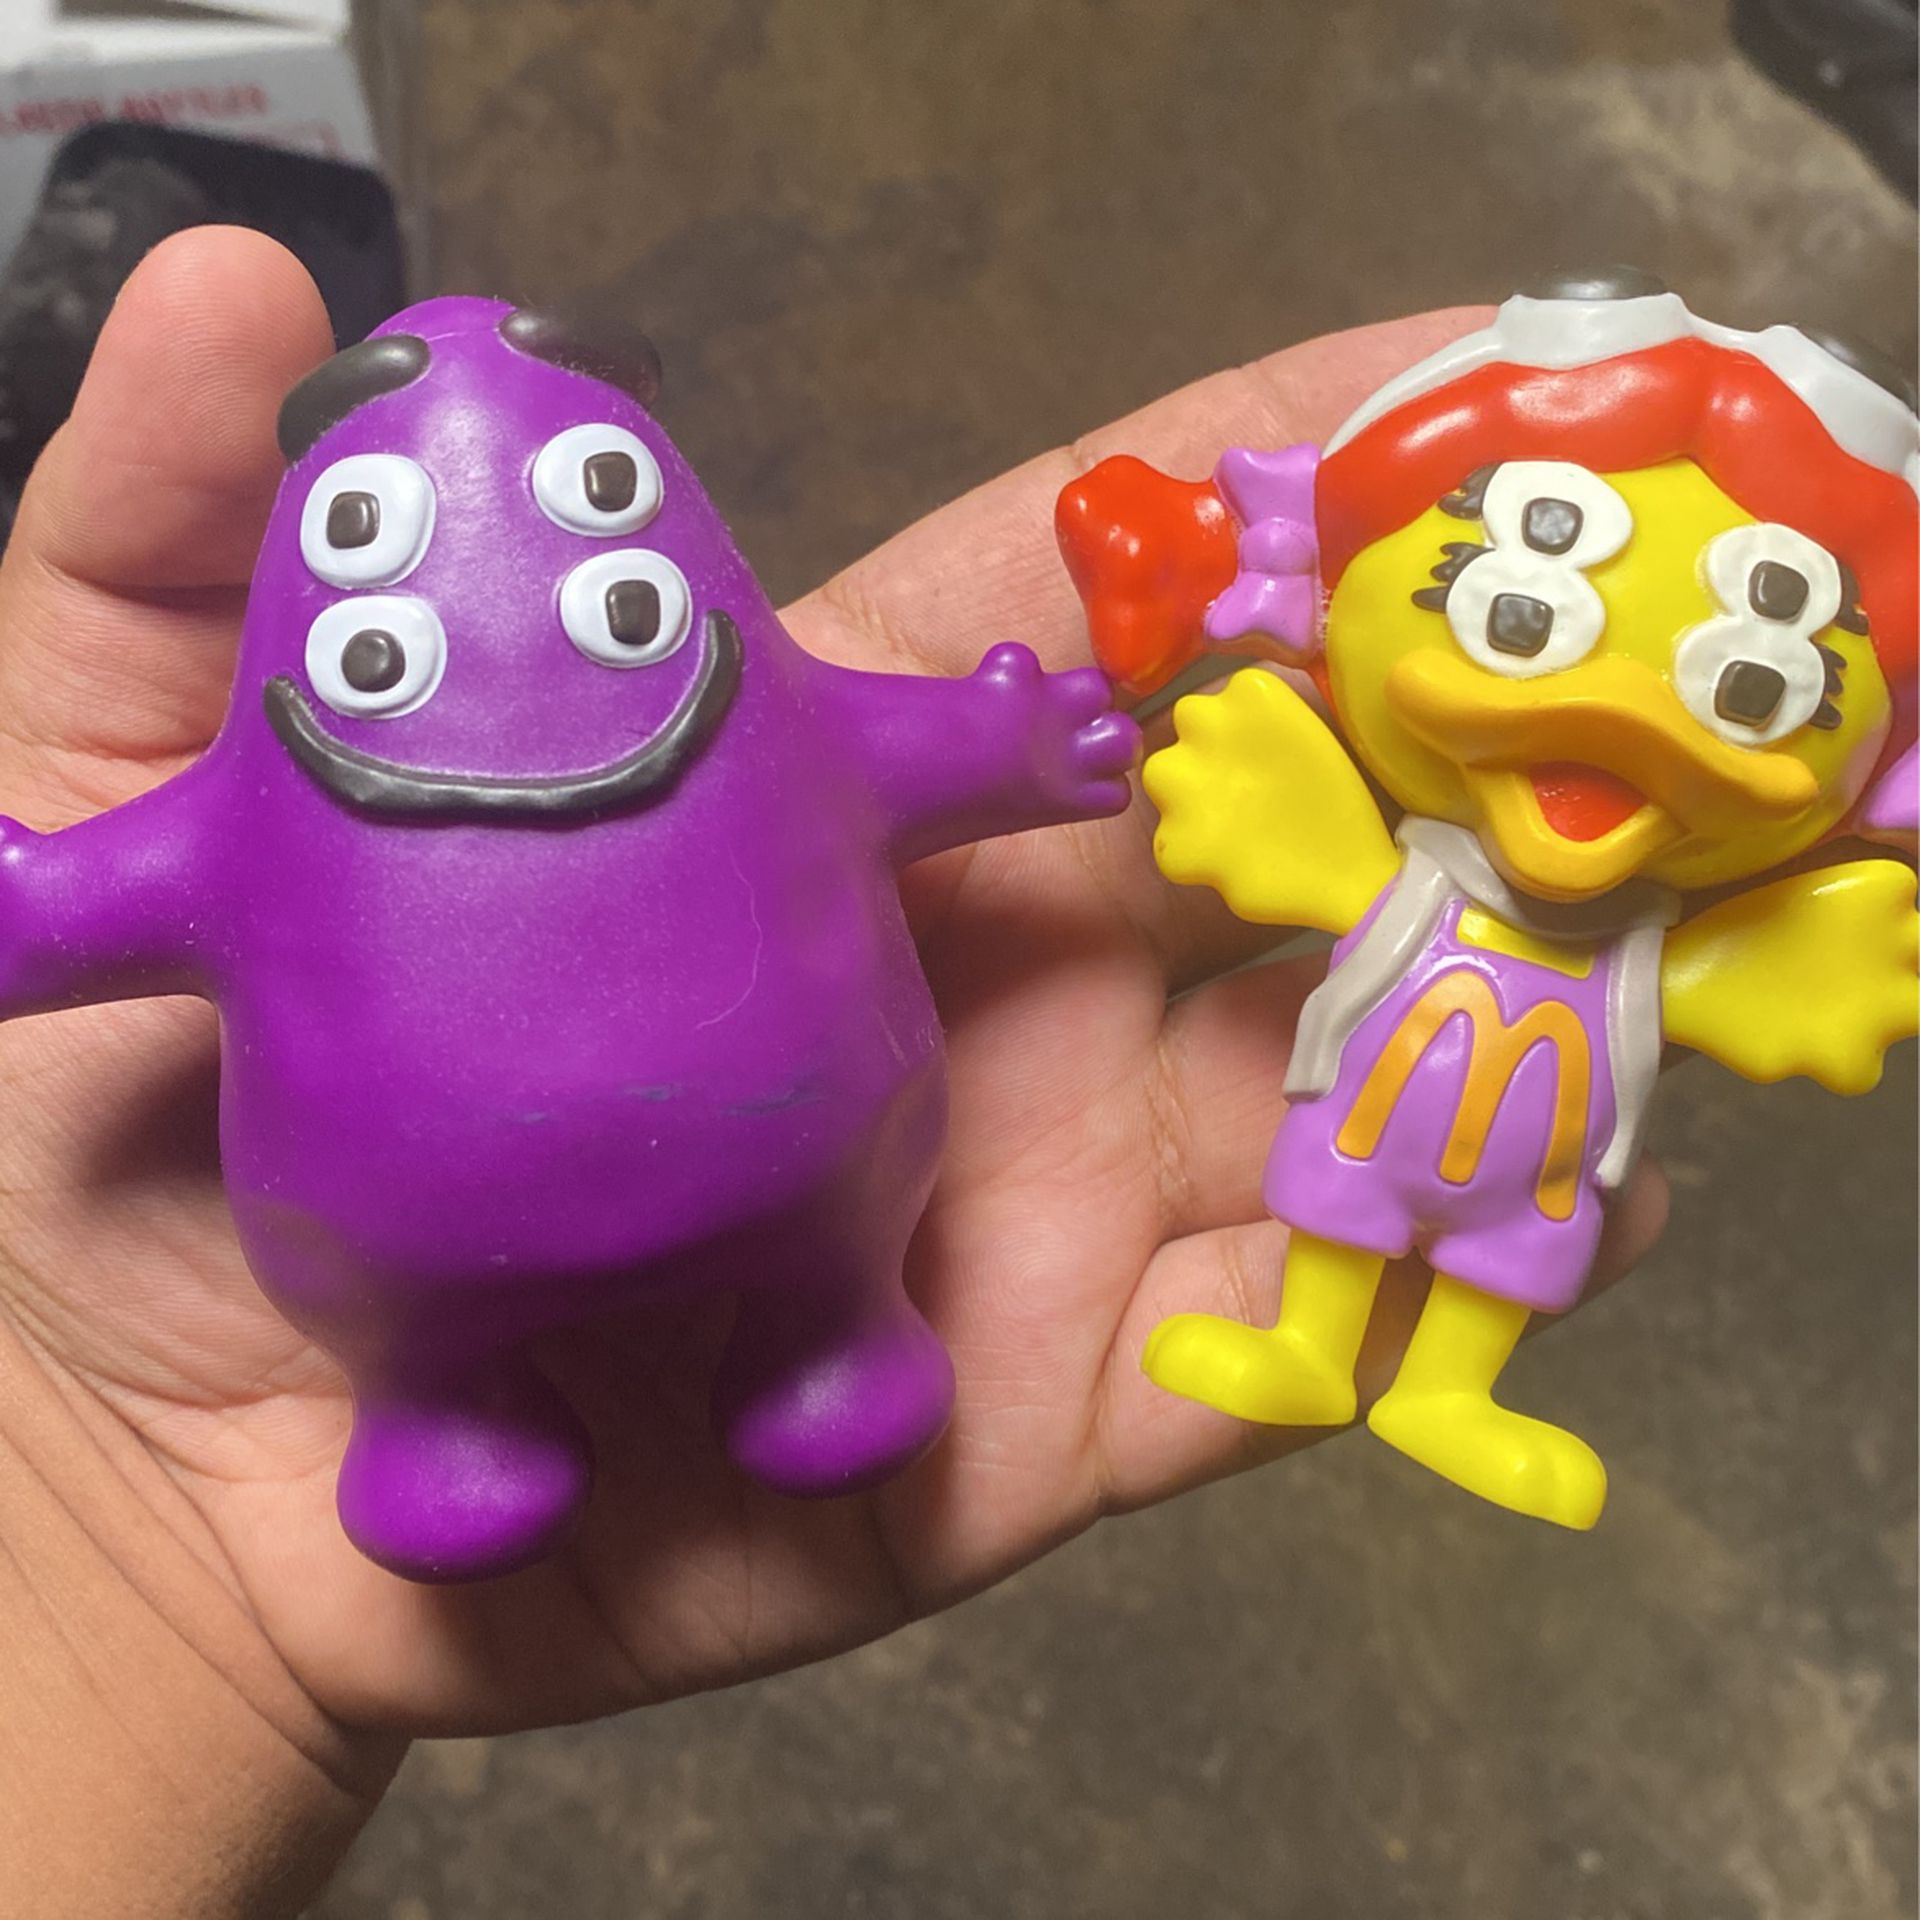 McDonald’s X CPFM Toys From 2022